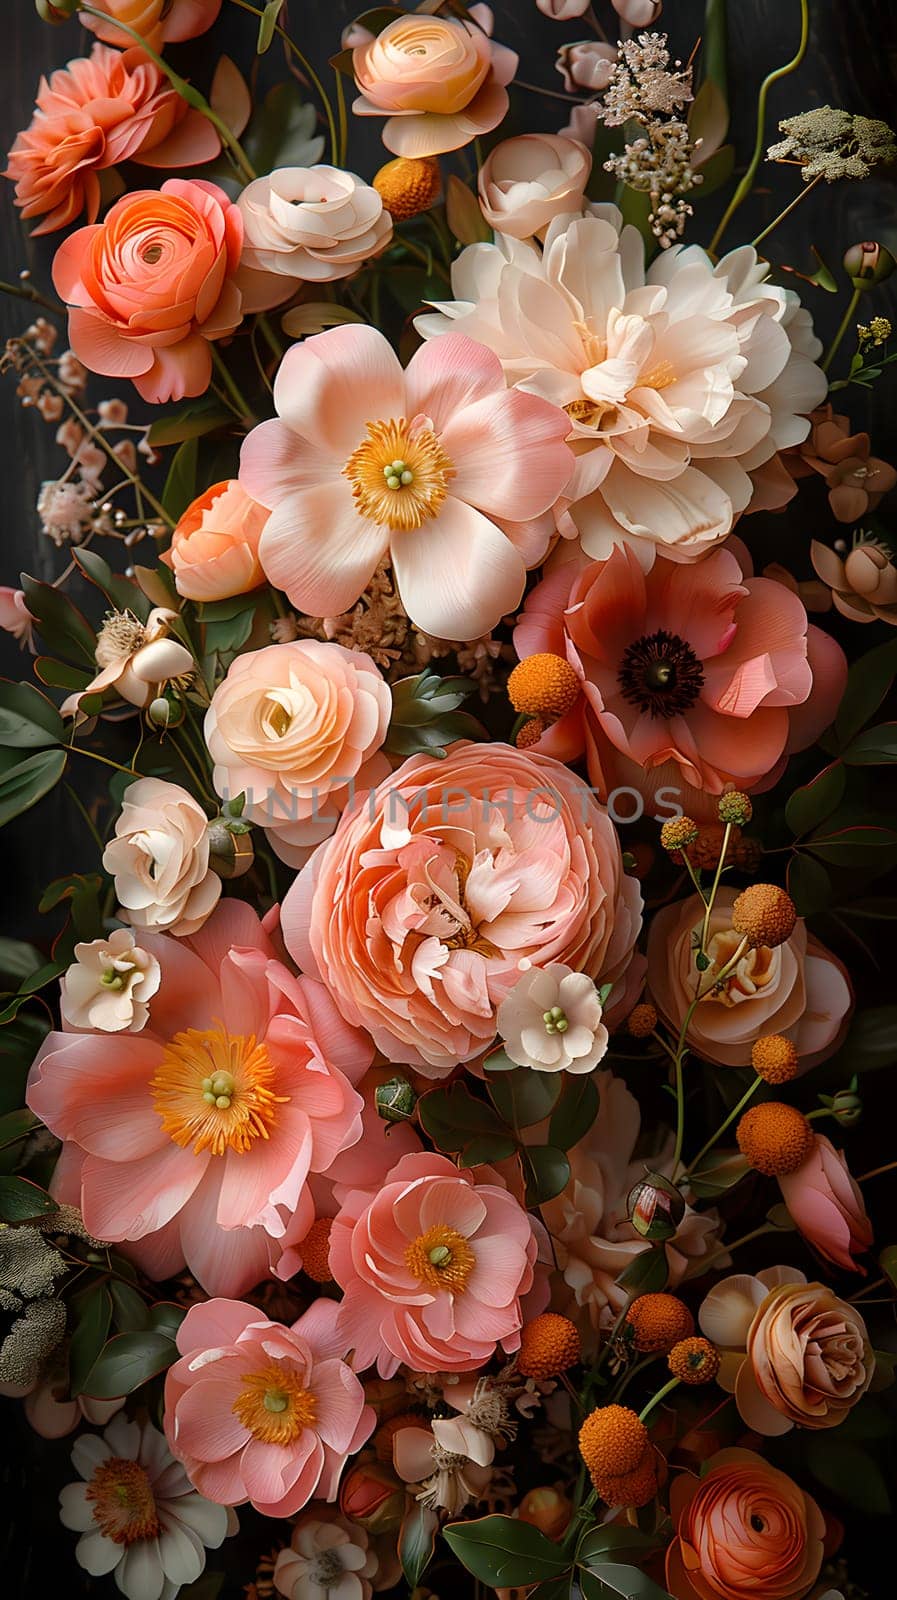 A closeup of a bouquet of pink flowers from the Rose family on a dark black background, showcasing the beauty of flowering plants in the Rose order